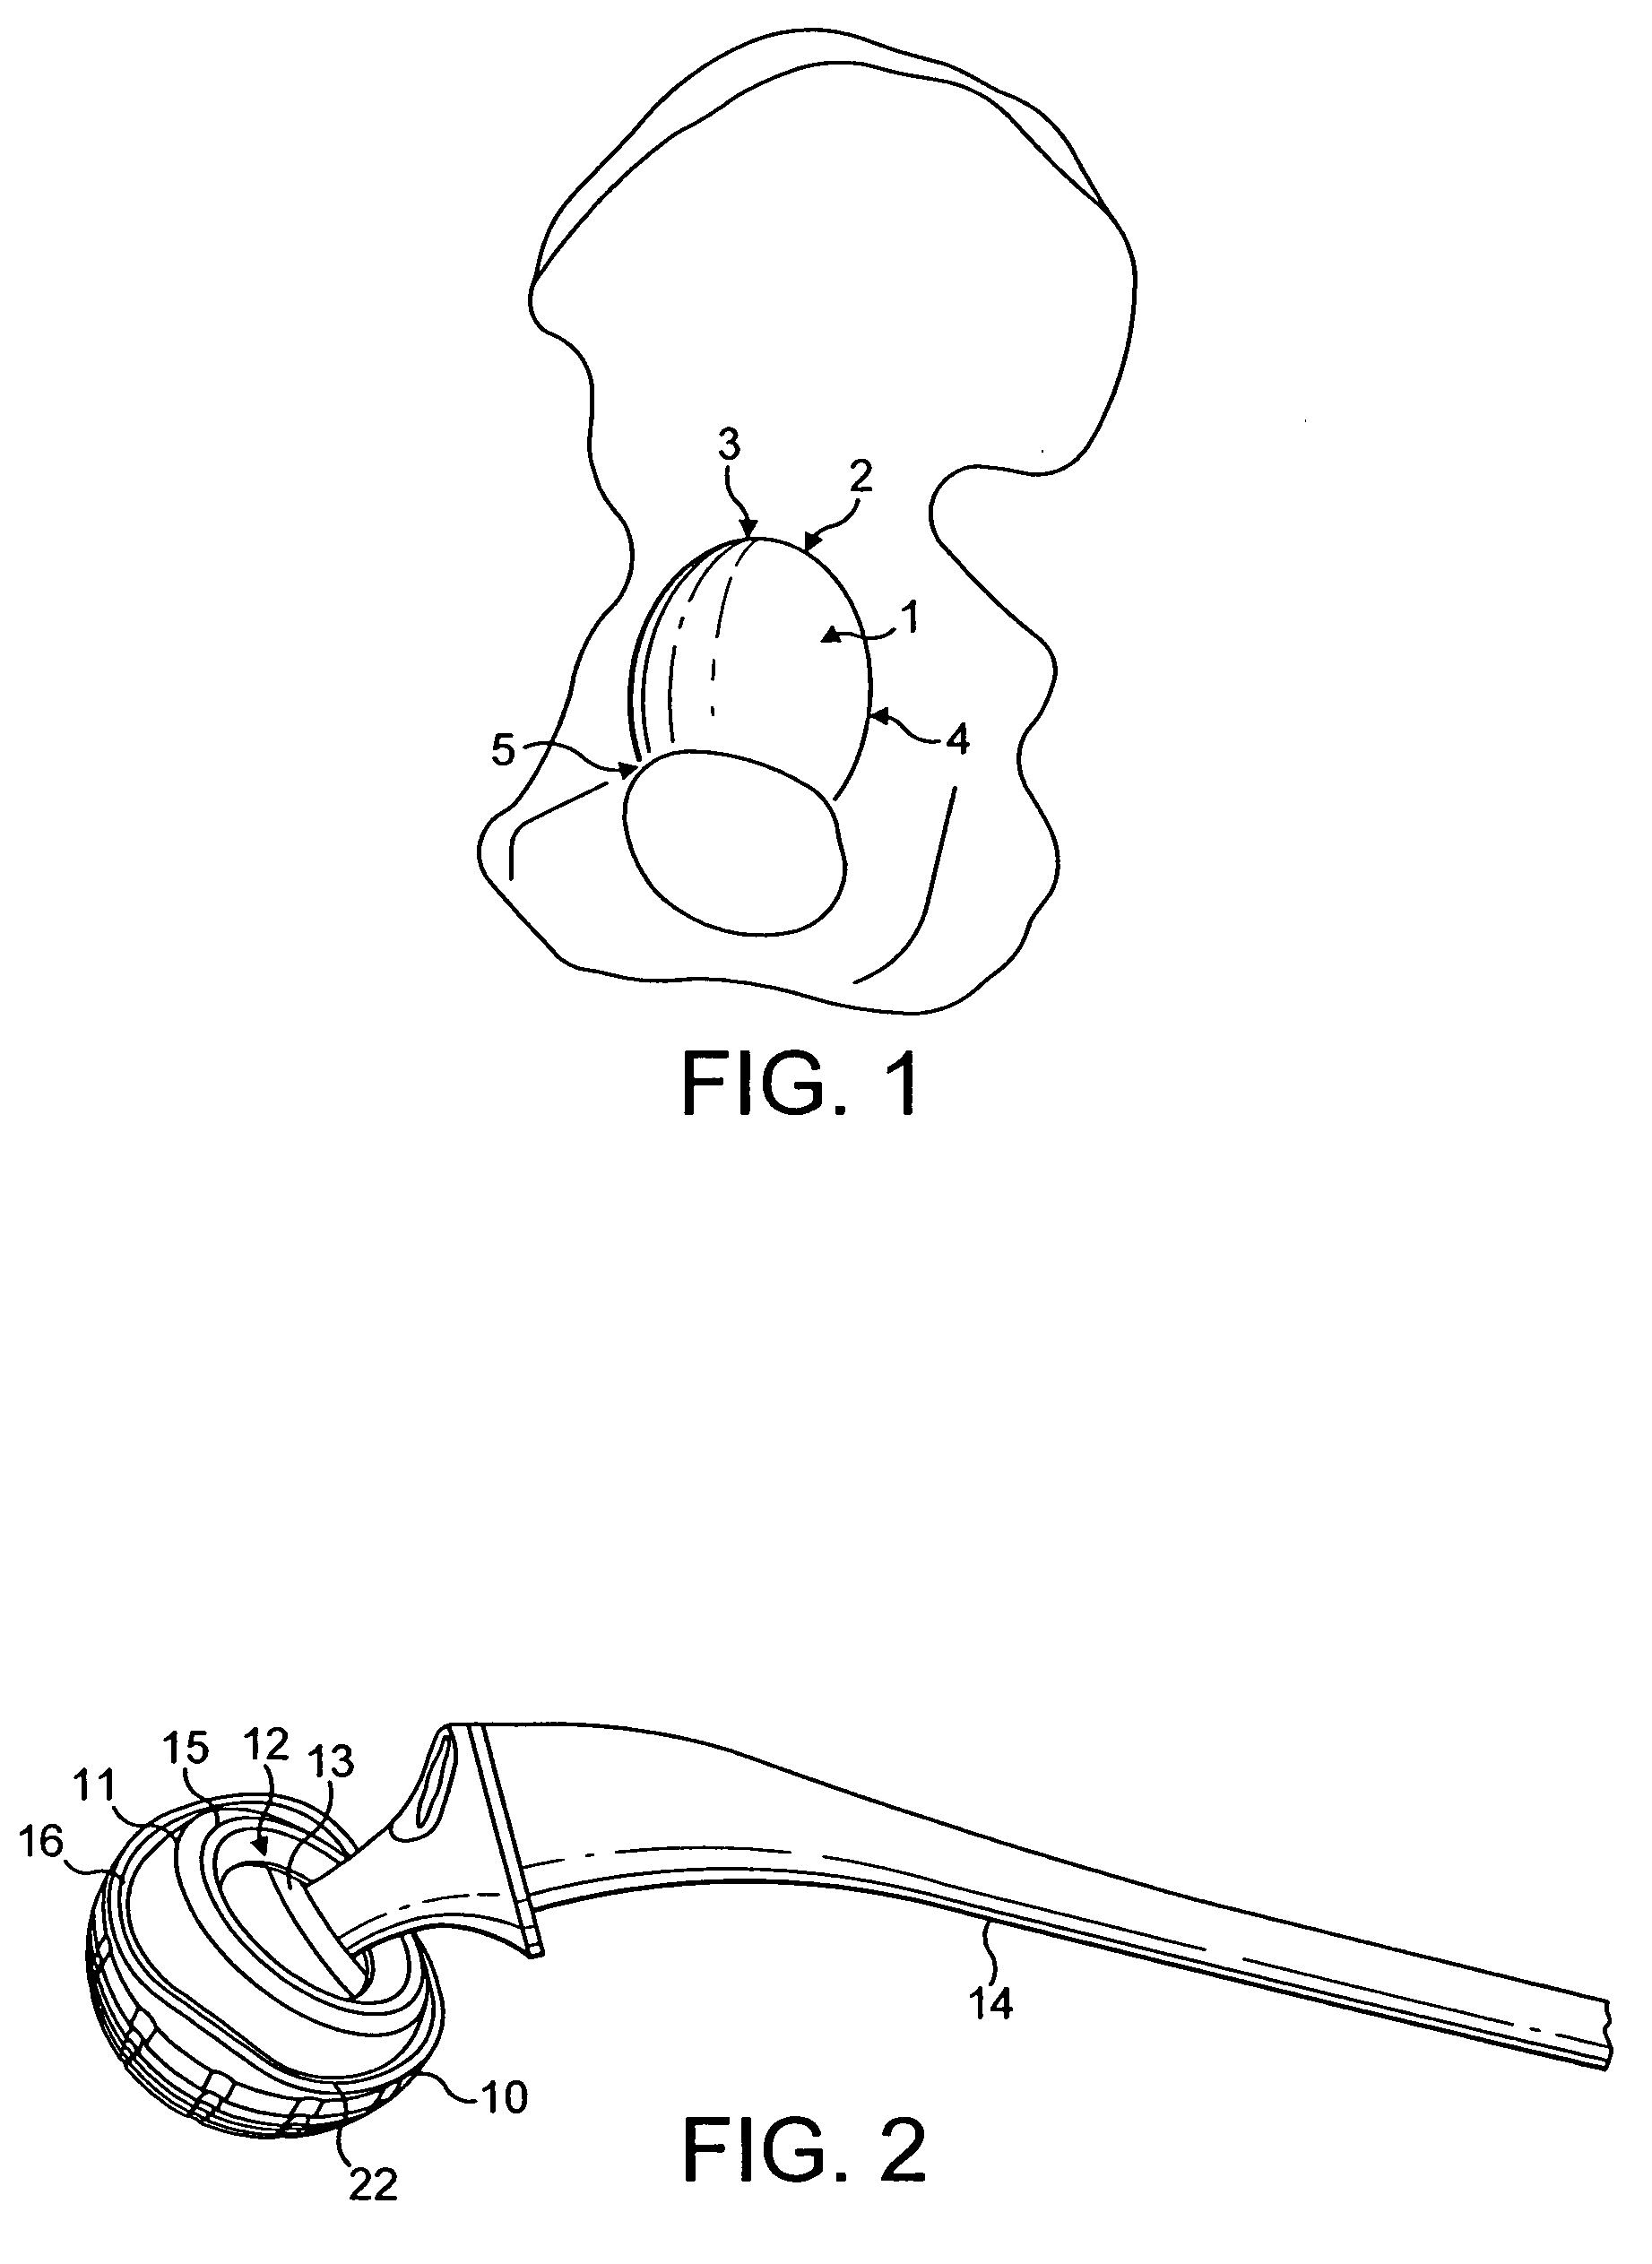 Prosthetic acetabular cup and prosthetic femoral joint incorporating such a cup